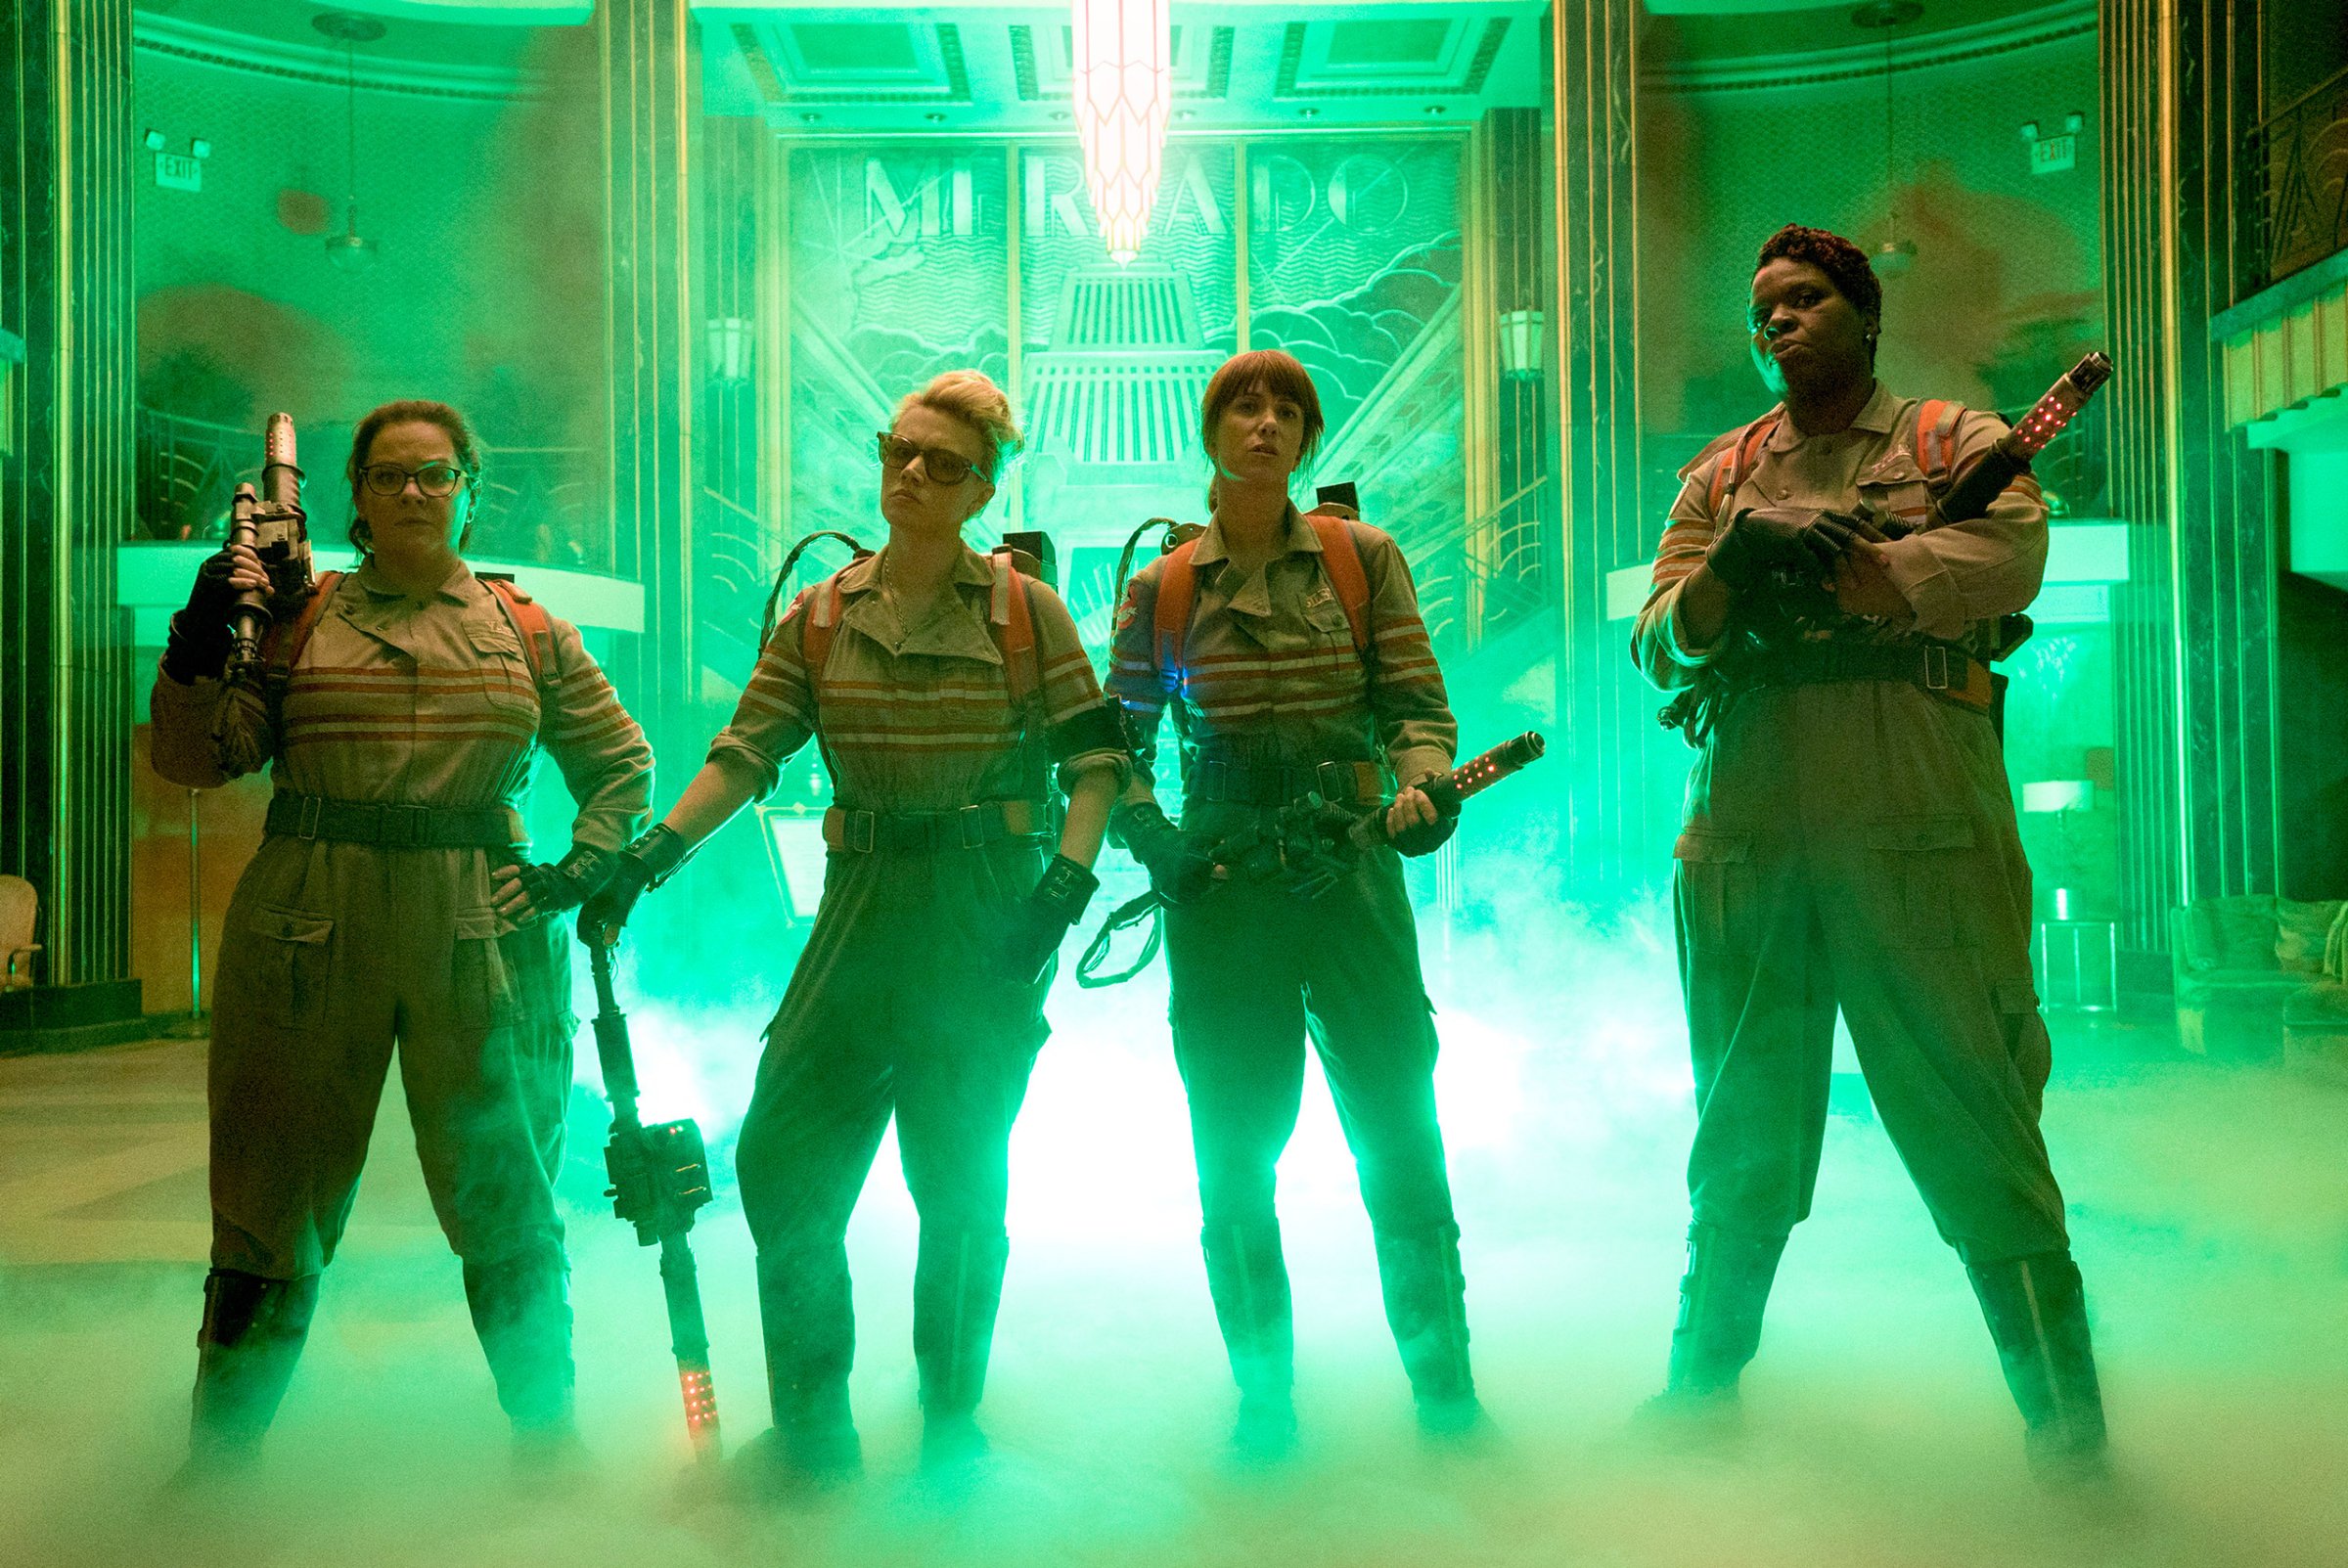 Abby (Melissa McCarthy), Holtzmann (Kate McKinnon), Erin (Kristen Wiig) and Patty (Leslie Jones) inside the Mercado Hotel Lobby in Columbia Pictures' GHOSTBUSTERS.